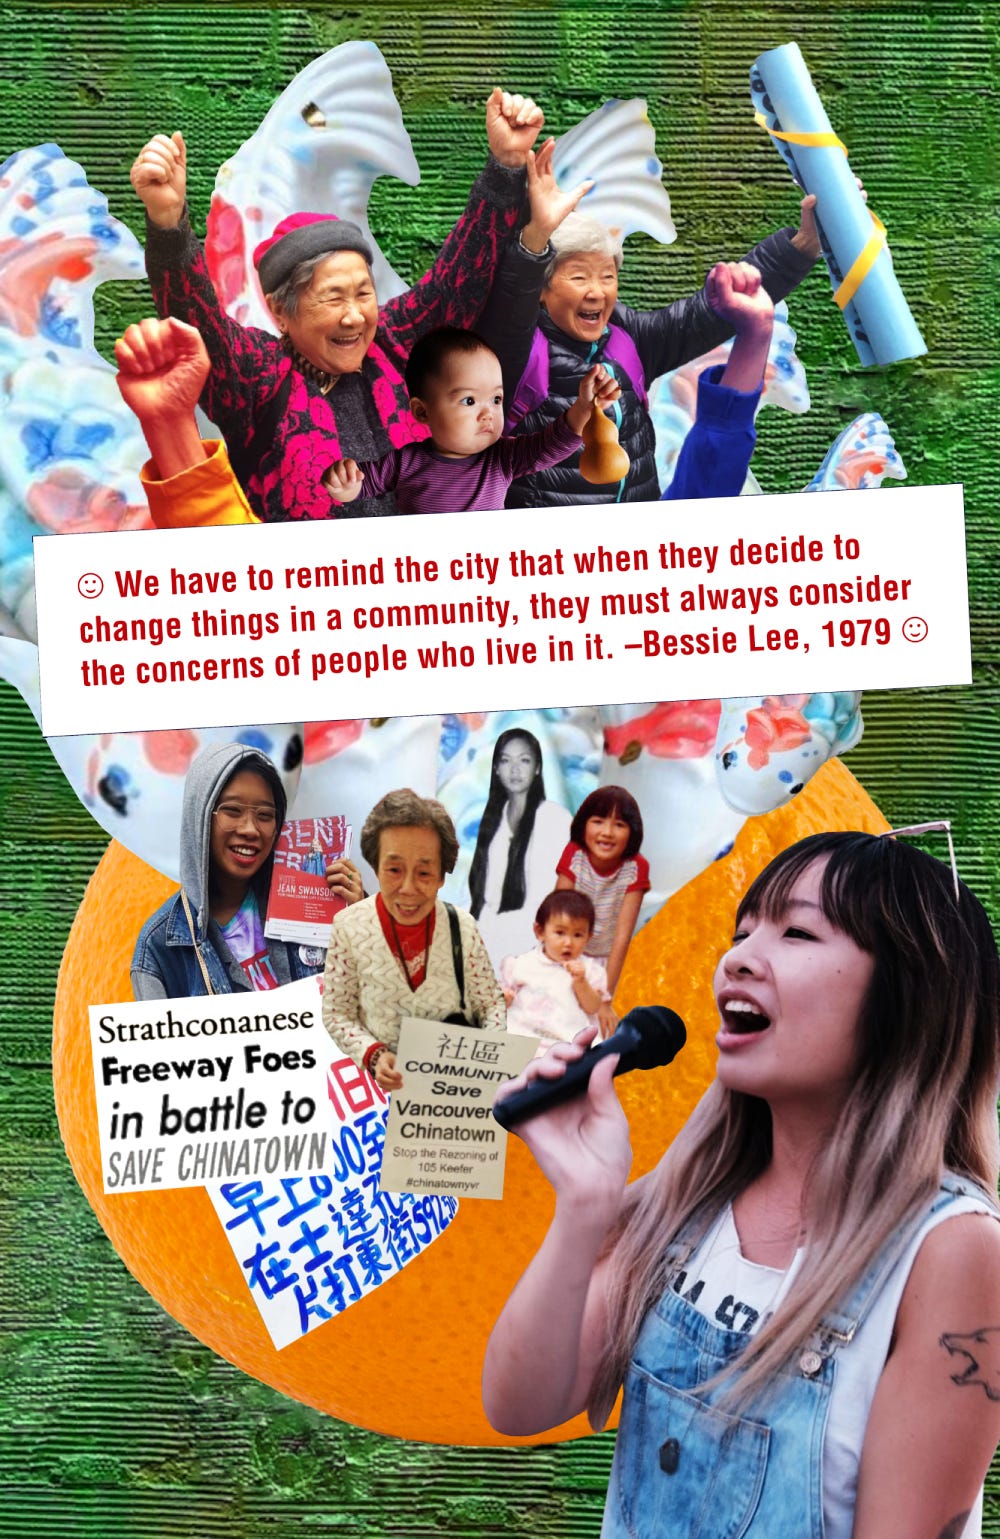 The poster shows a digital collage, using recent and historical photos of matriarchal Chinatown elders, organizers, activists, and community members. Some of the people have their fists in their air, smiling, others are holding signs that say, "Save Vancouver Chinatown." A white banner says, "We have to remind the city that when they decide to change things in a community, they must always consider the concerns of people who live in it. --Bessie Lee, 1979"